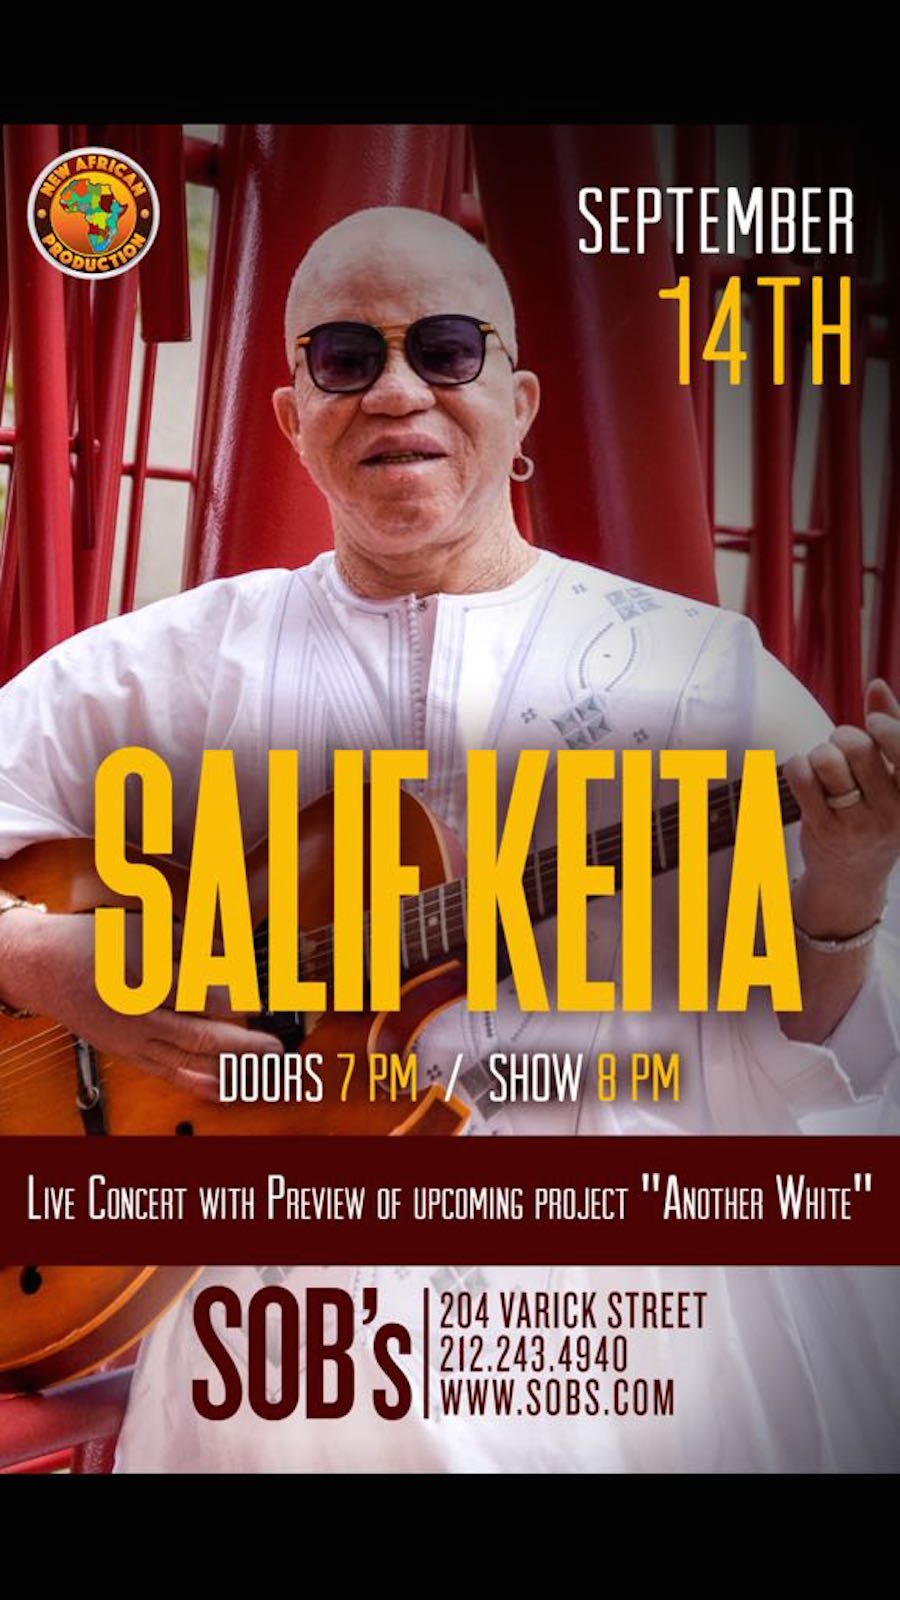 S.O.B.'s in collaboration with New African Production presents Malian legend Salif Keita Thursday, September 14, 2017 at S.O.B.'s.  Doors Open 7PM / Show 8 PM